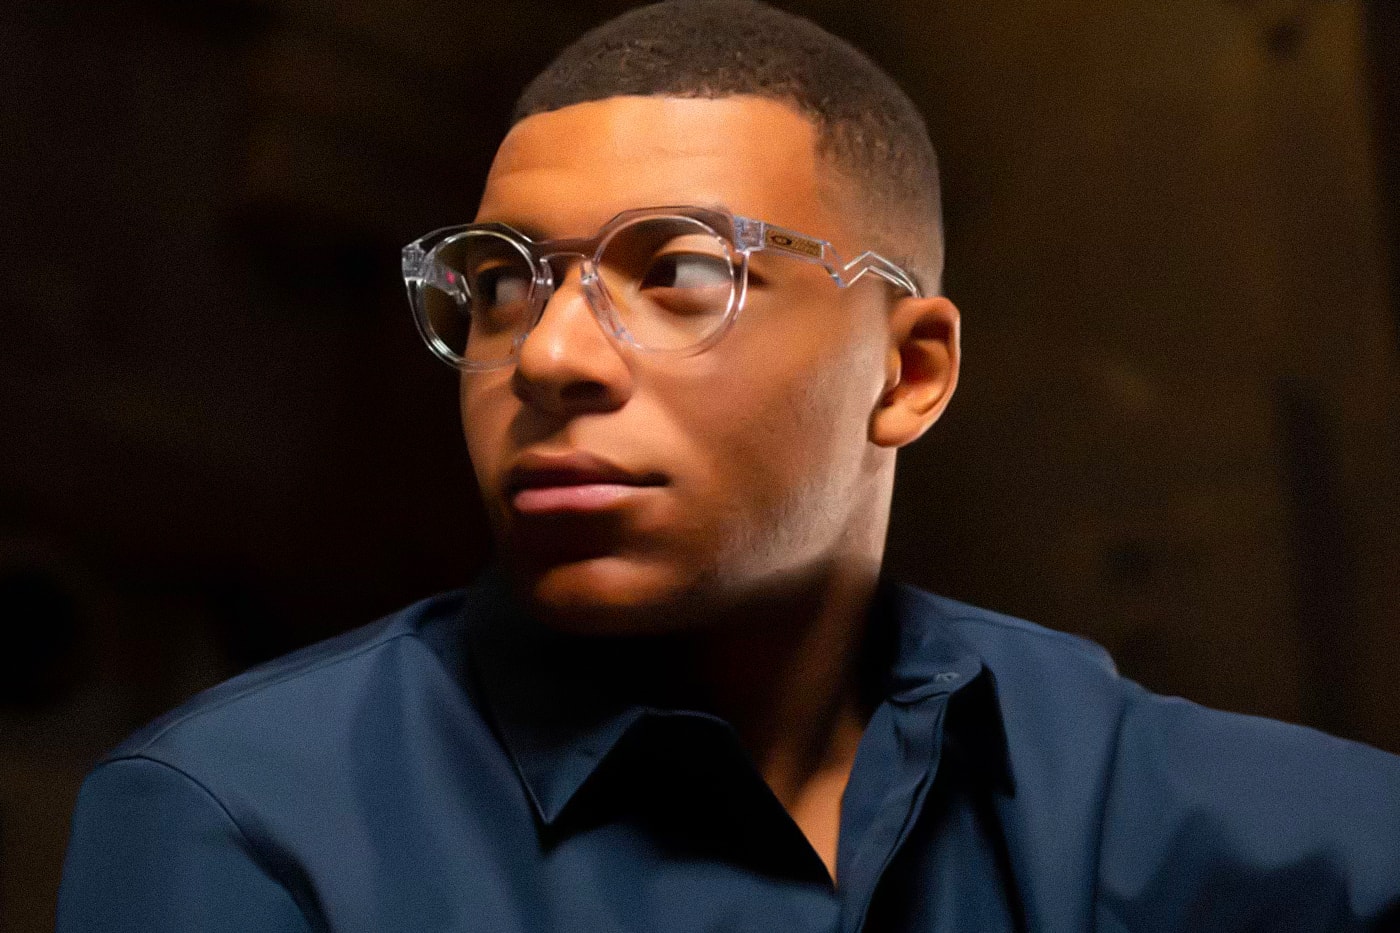 Oakley Taps Kylian Mbappé for Football-Infused "Signature Series" Eyewear